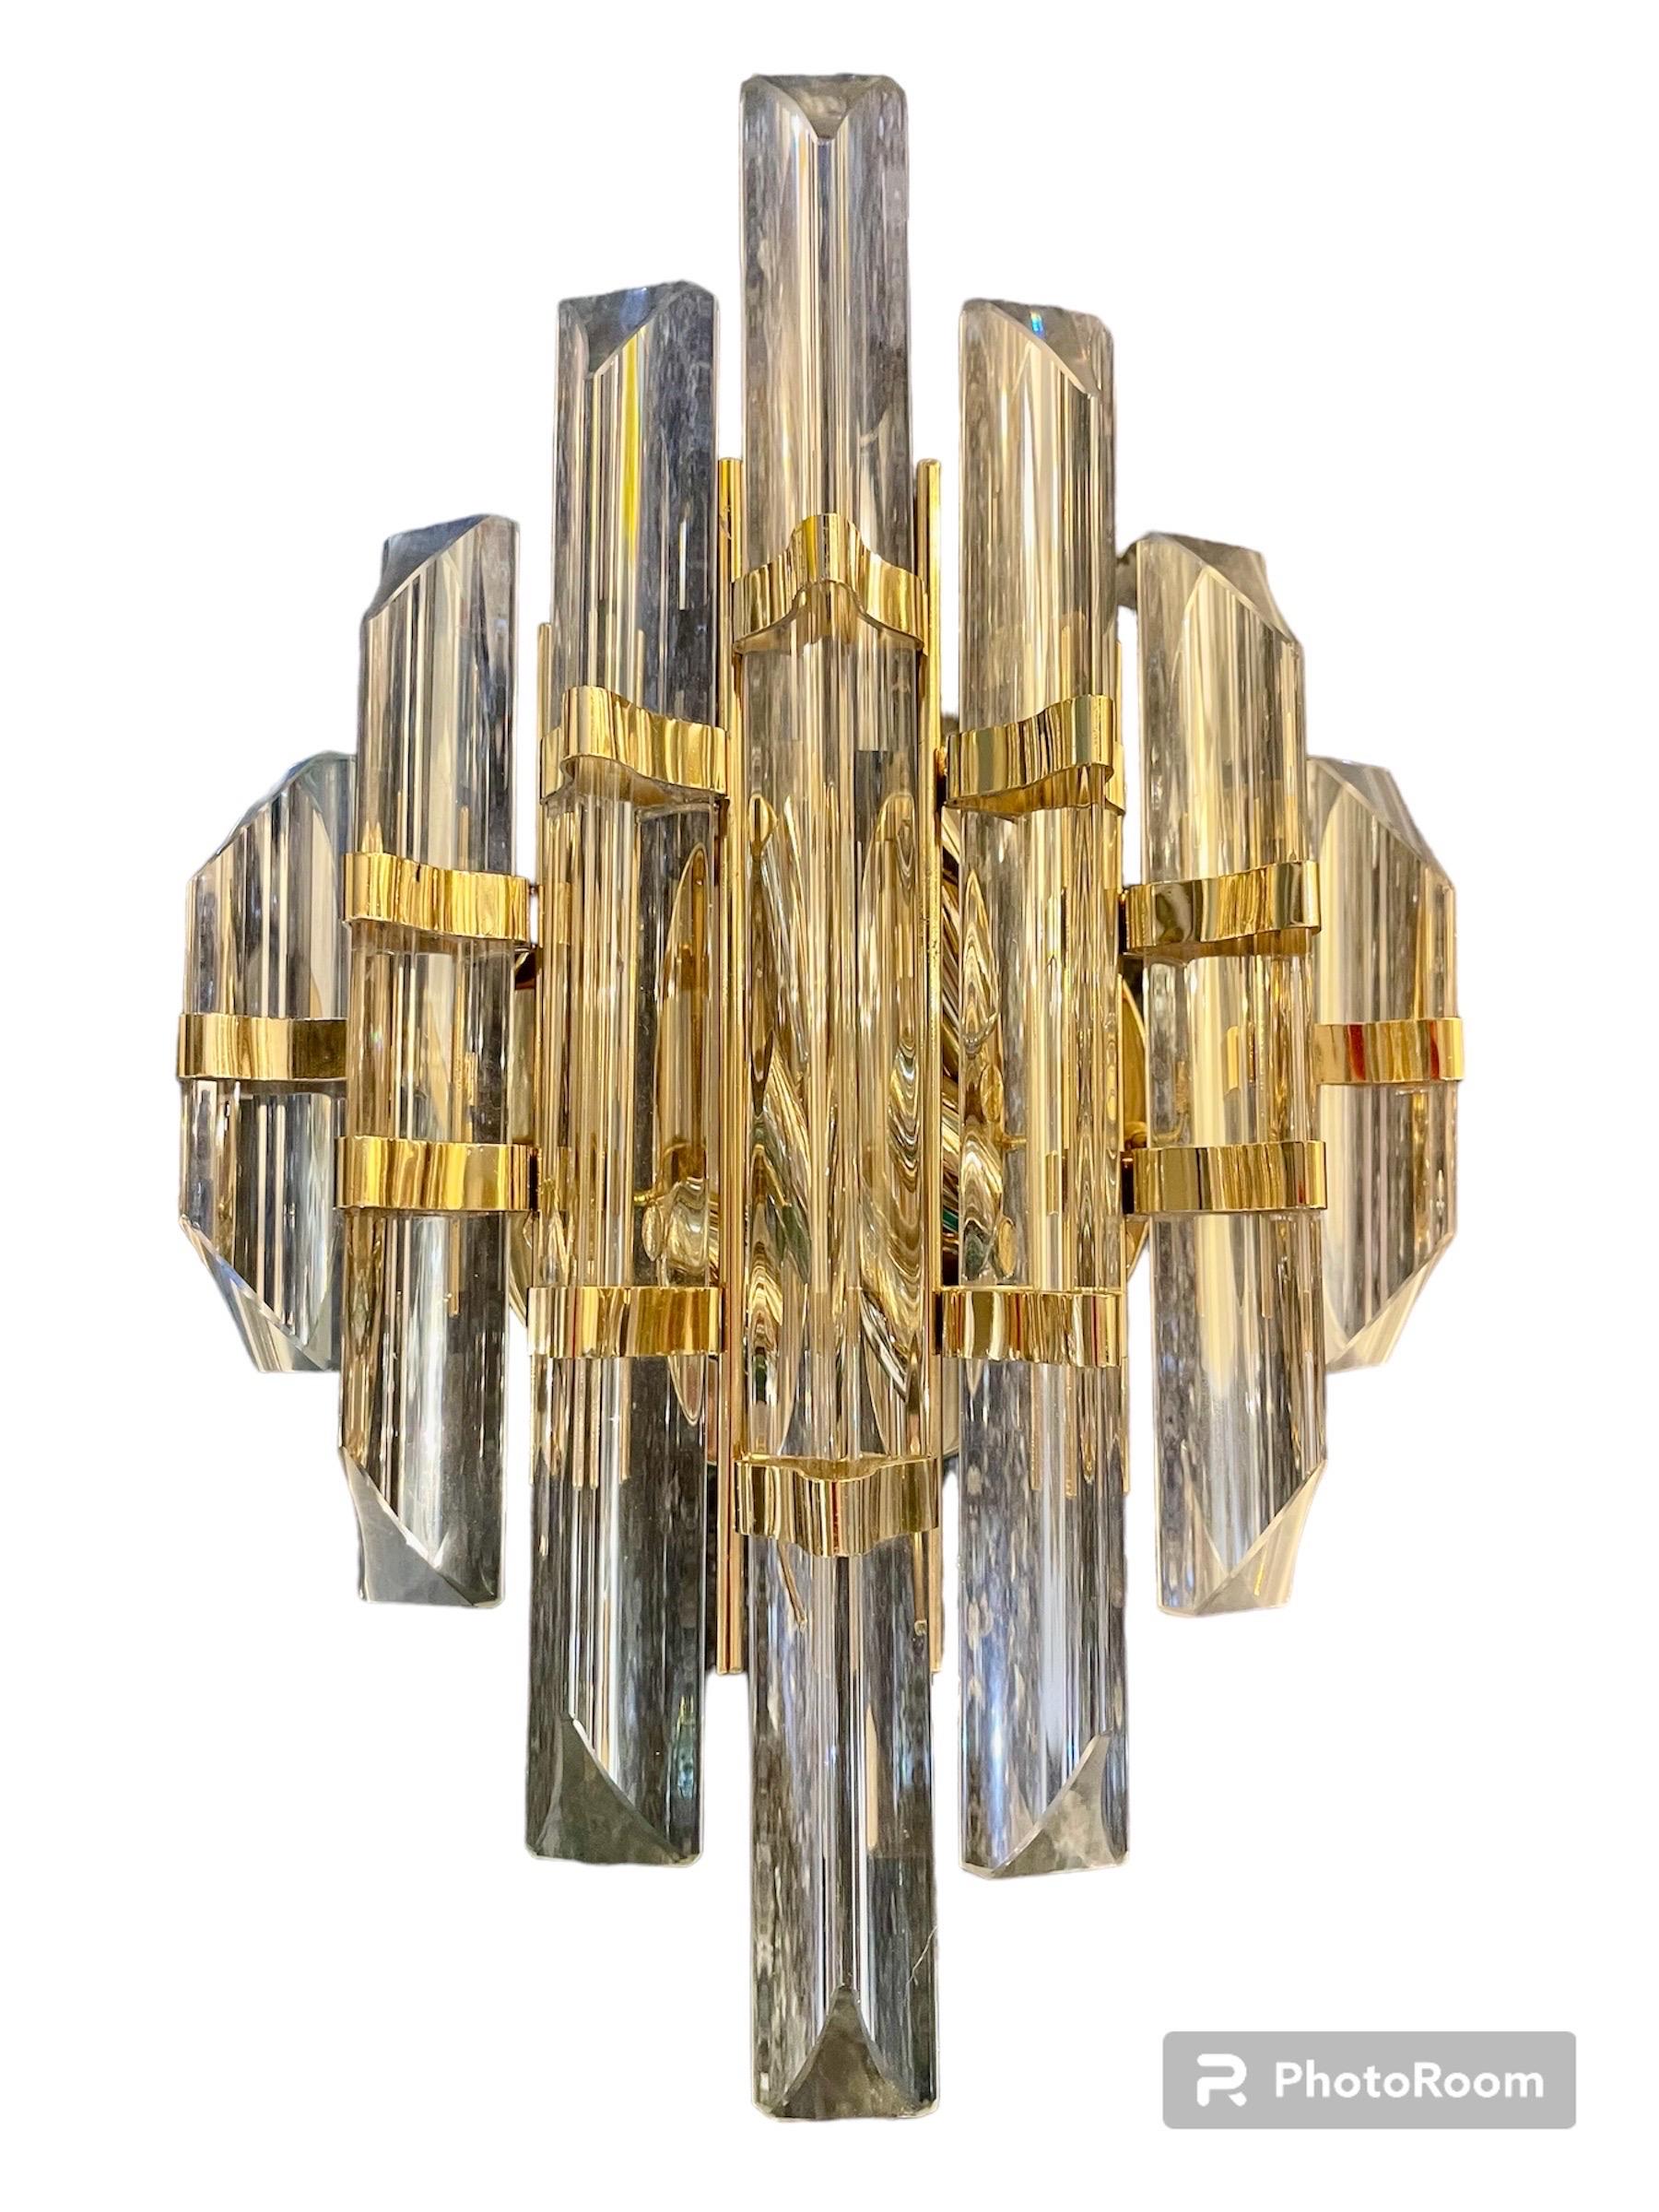 Venini wall lighting murano glass with in iridium glass. The design and the quality of the glass make this piece the best of the design.
This wall lighting pair are in good condition.

Please ask for Shipping Quote !
Venini is an Italian company